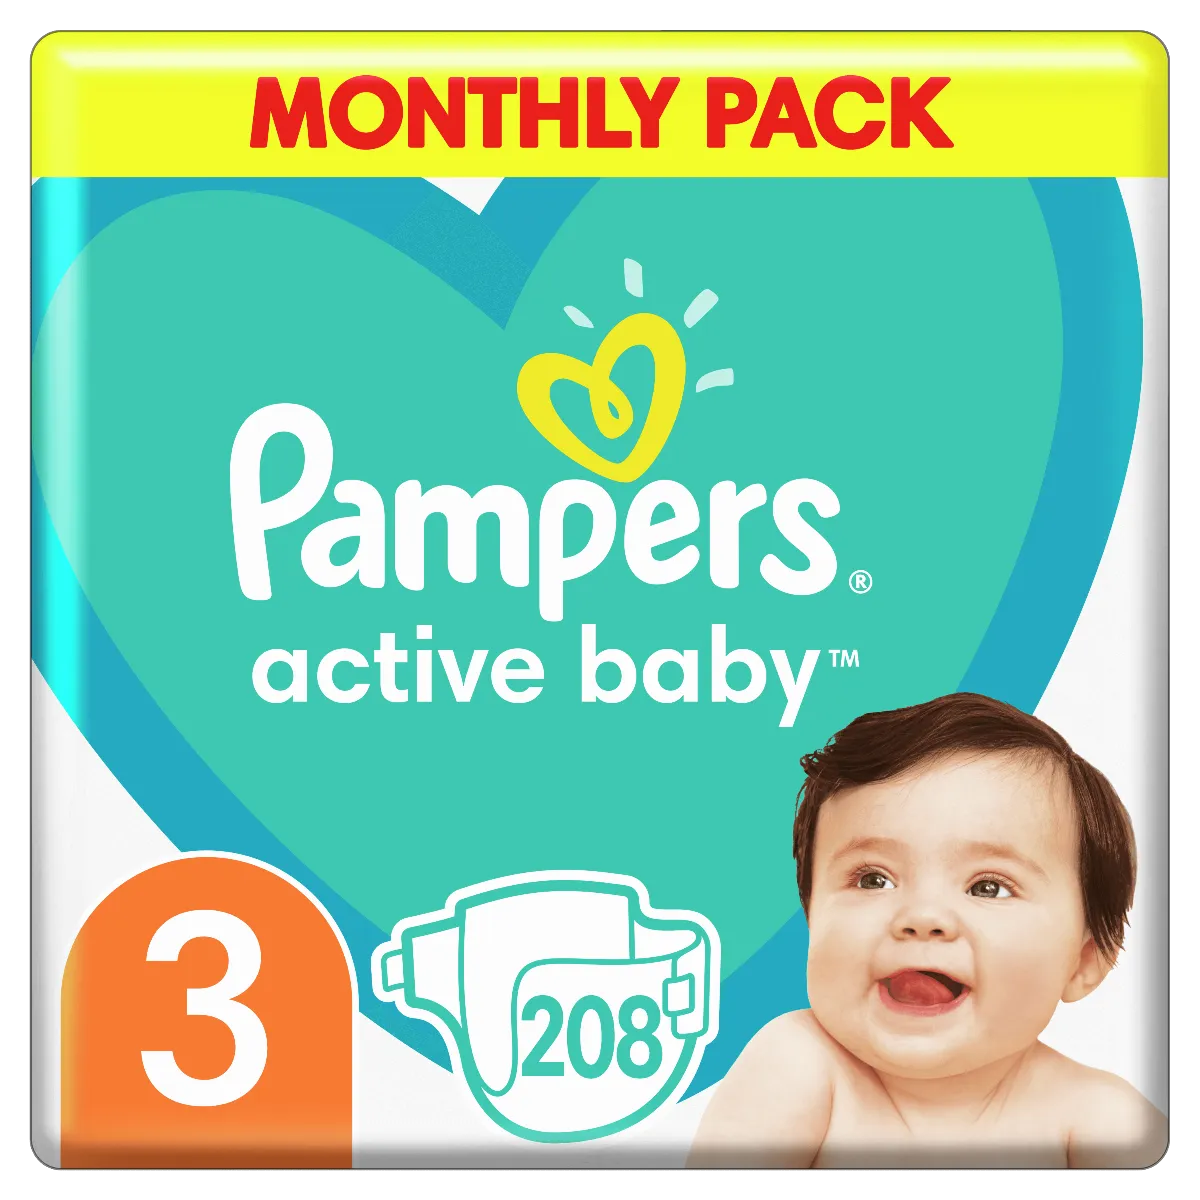 pampers new baby premium protection 1 cena